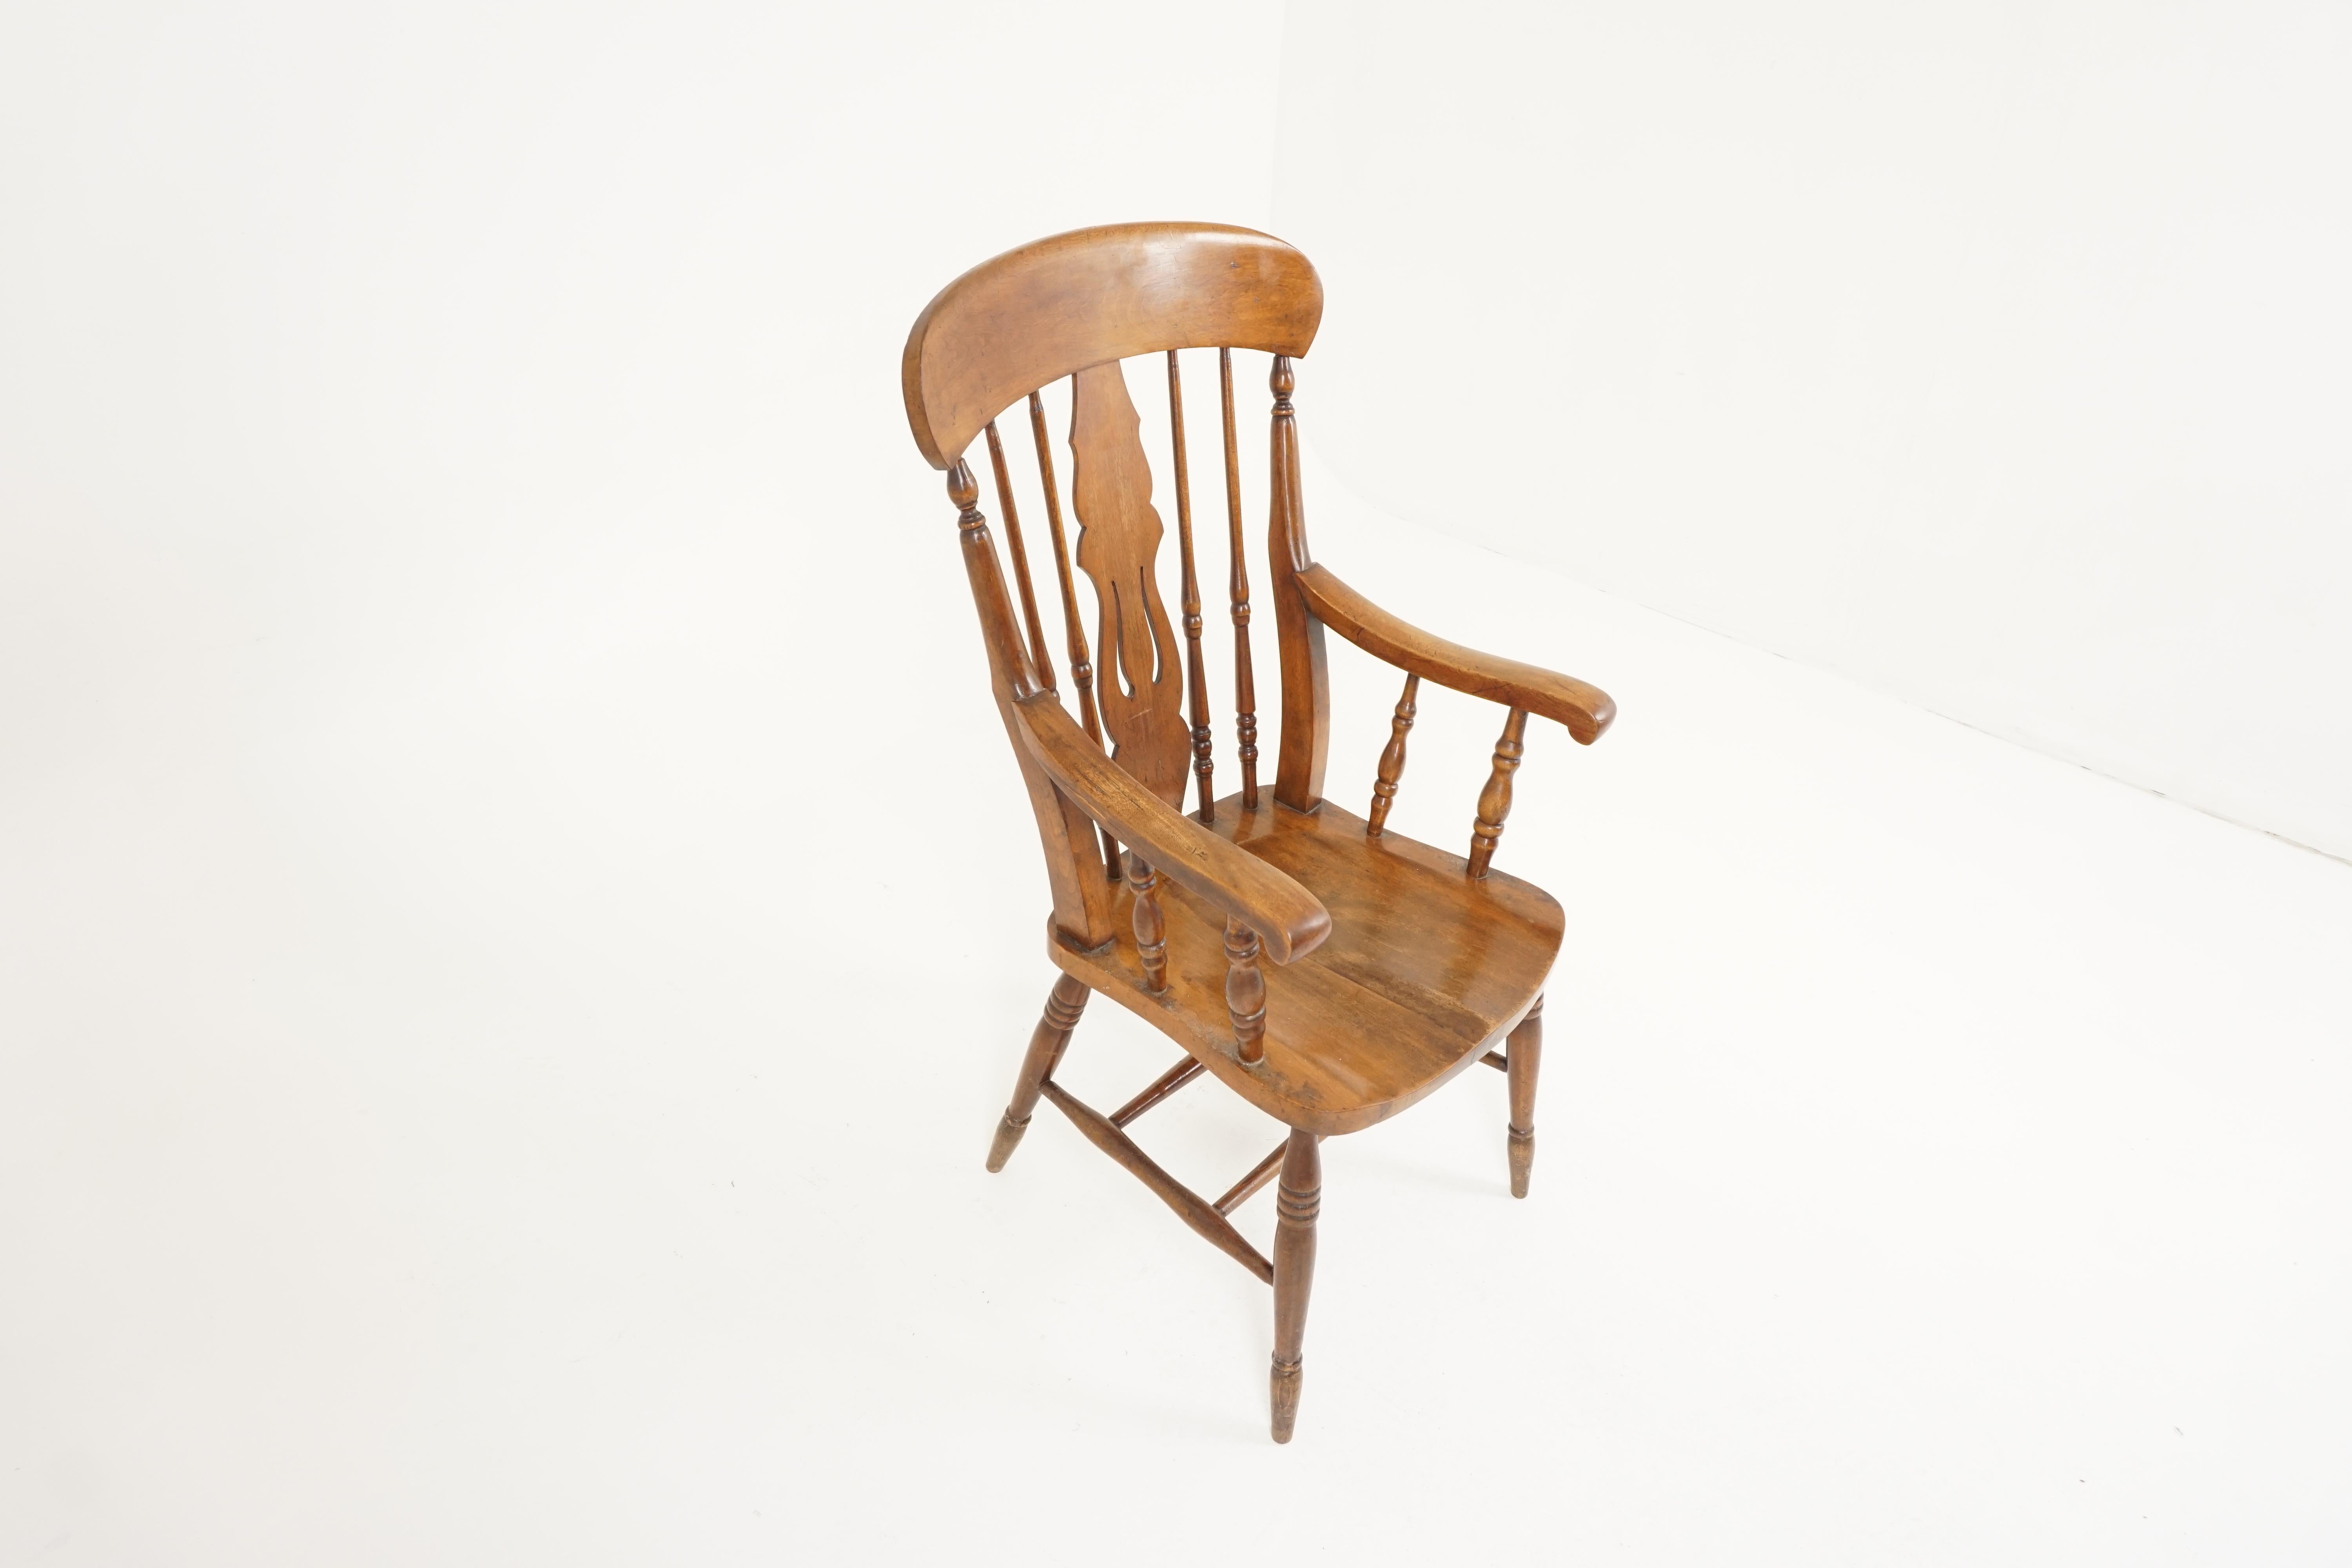 Scottish Antique Arm Chair, Windsor High Back, Country Beech Chair, Scotland 1880, B2366